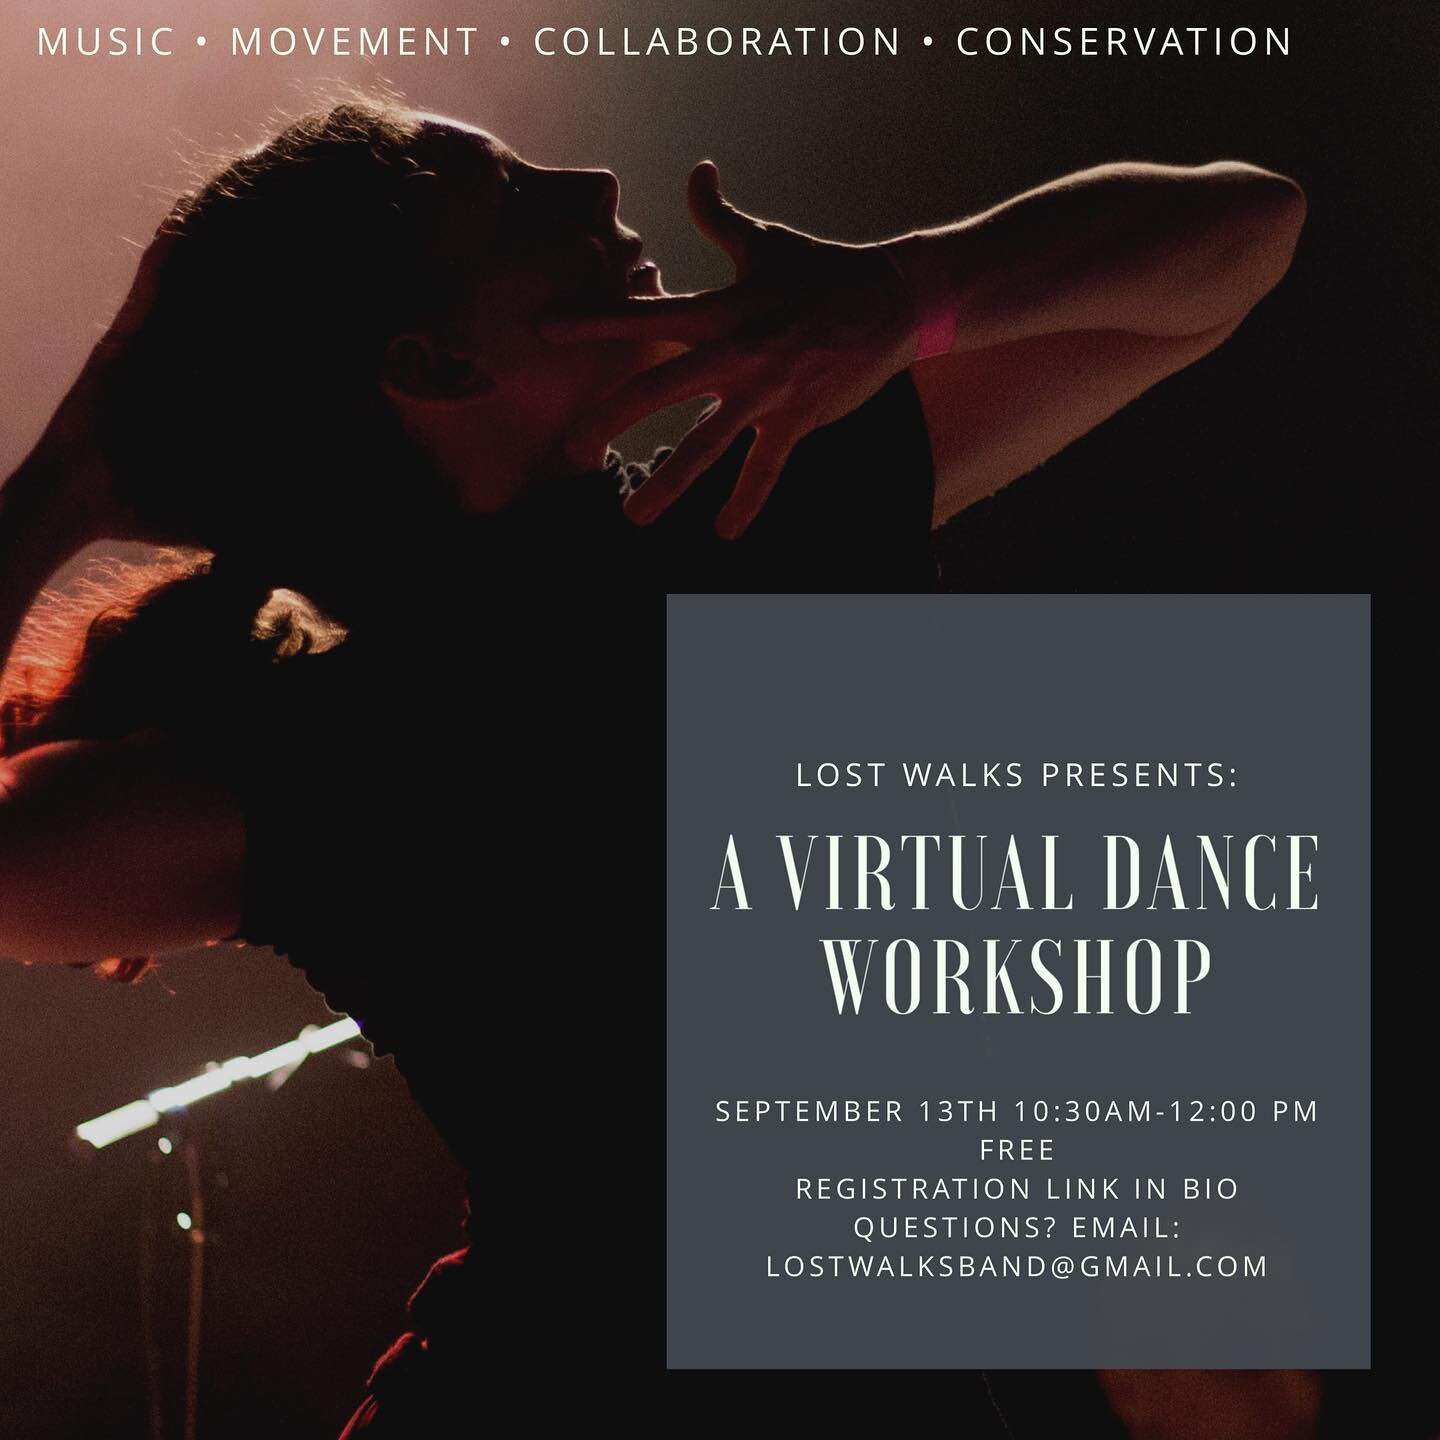 / Come move with us! We will share with you part of our process, movement phrases from our repertoire, and how we participate in the movement to bring wolves back to Colorado. 
 
We welcome people of color, individuals from the LGBTQ community, immig